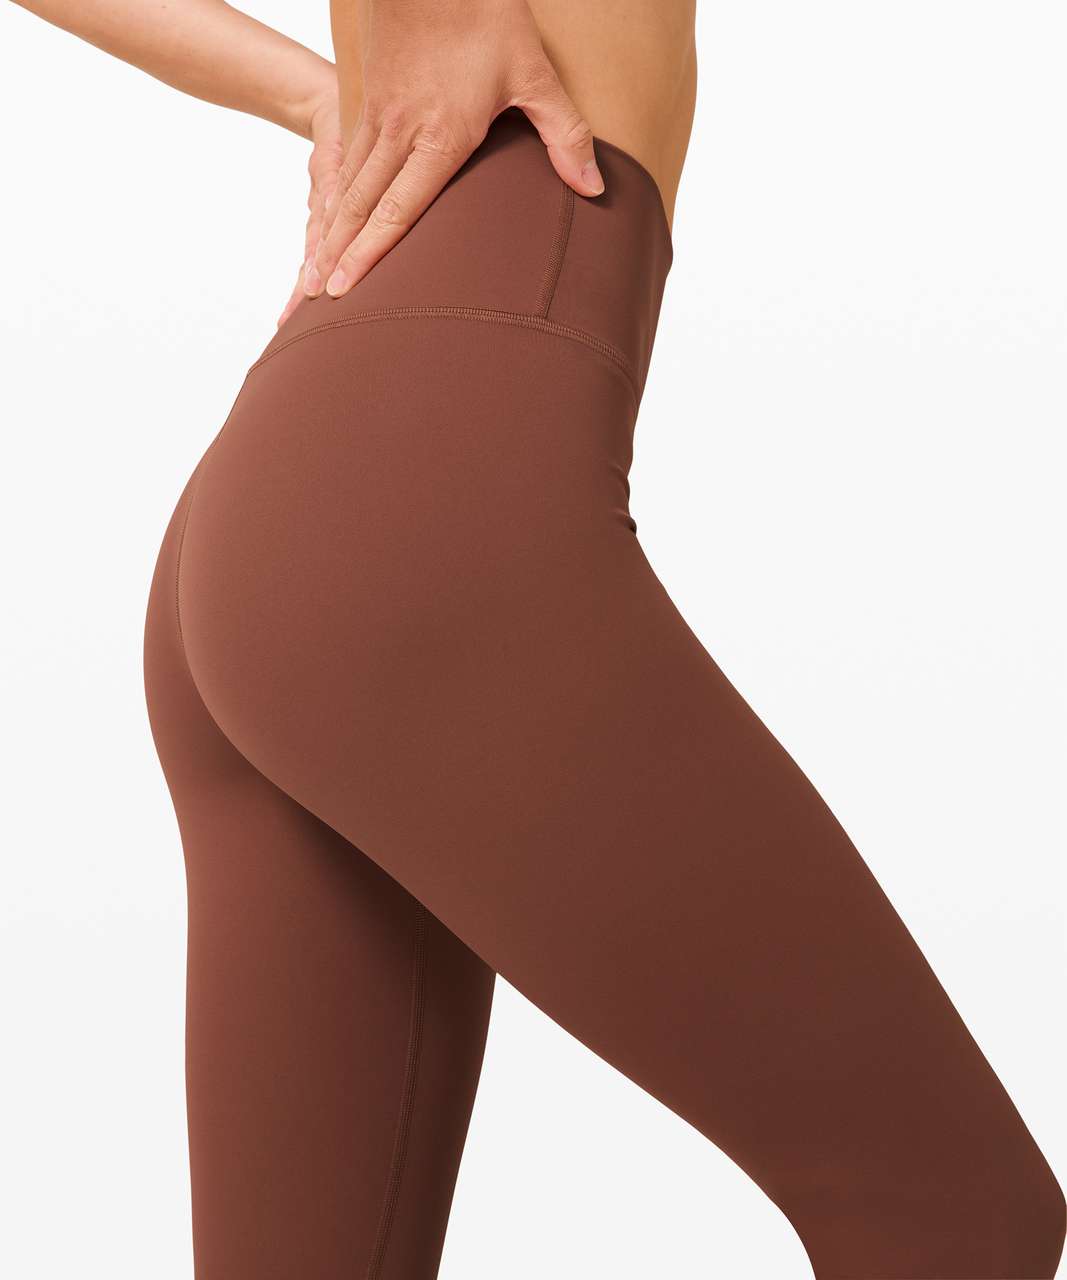 Lululemon Wunder Under High-Rise Tight 28" *Full-On Luxtreme - Ancient Copper